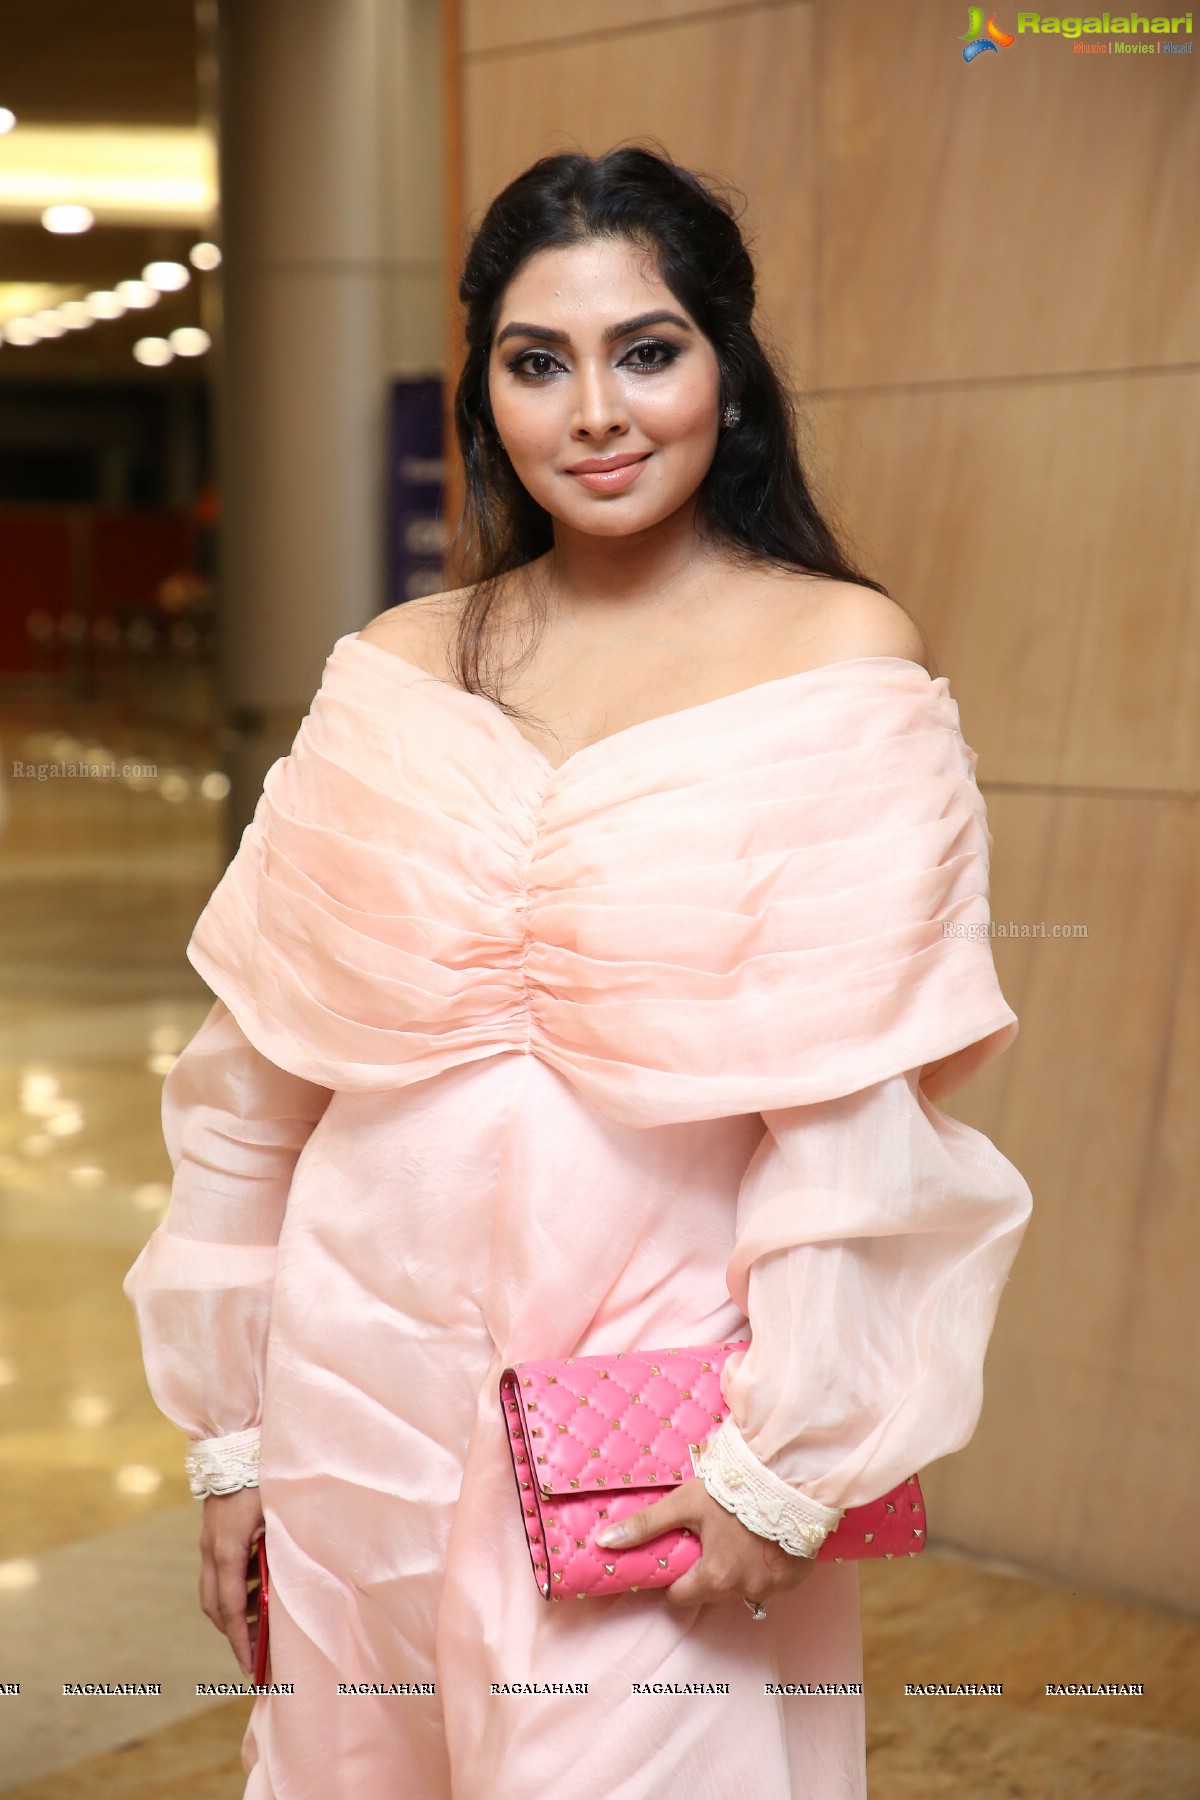 Heal-a-Child's Annual Fashion Show 2019 at HICC